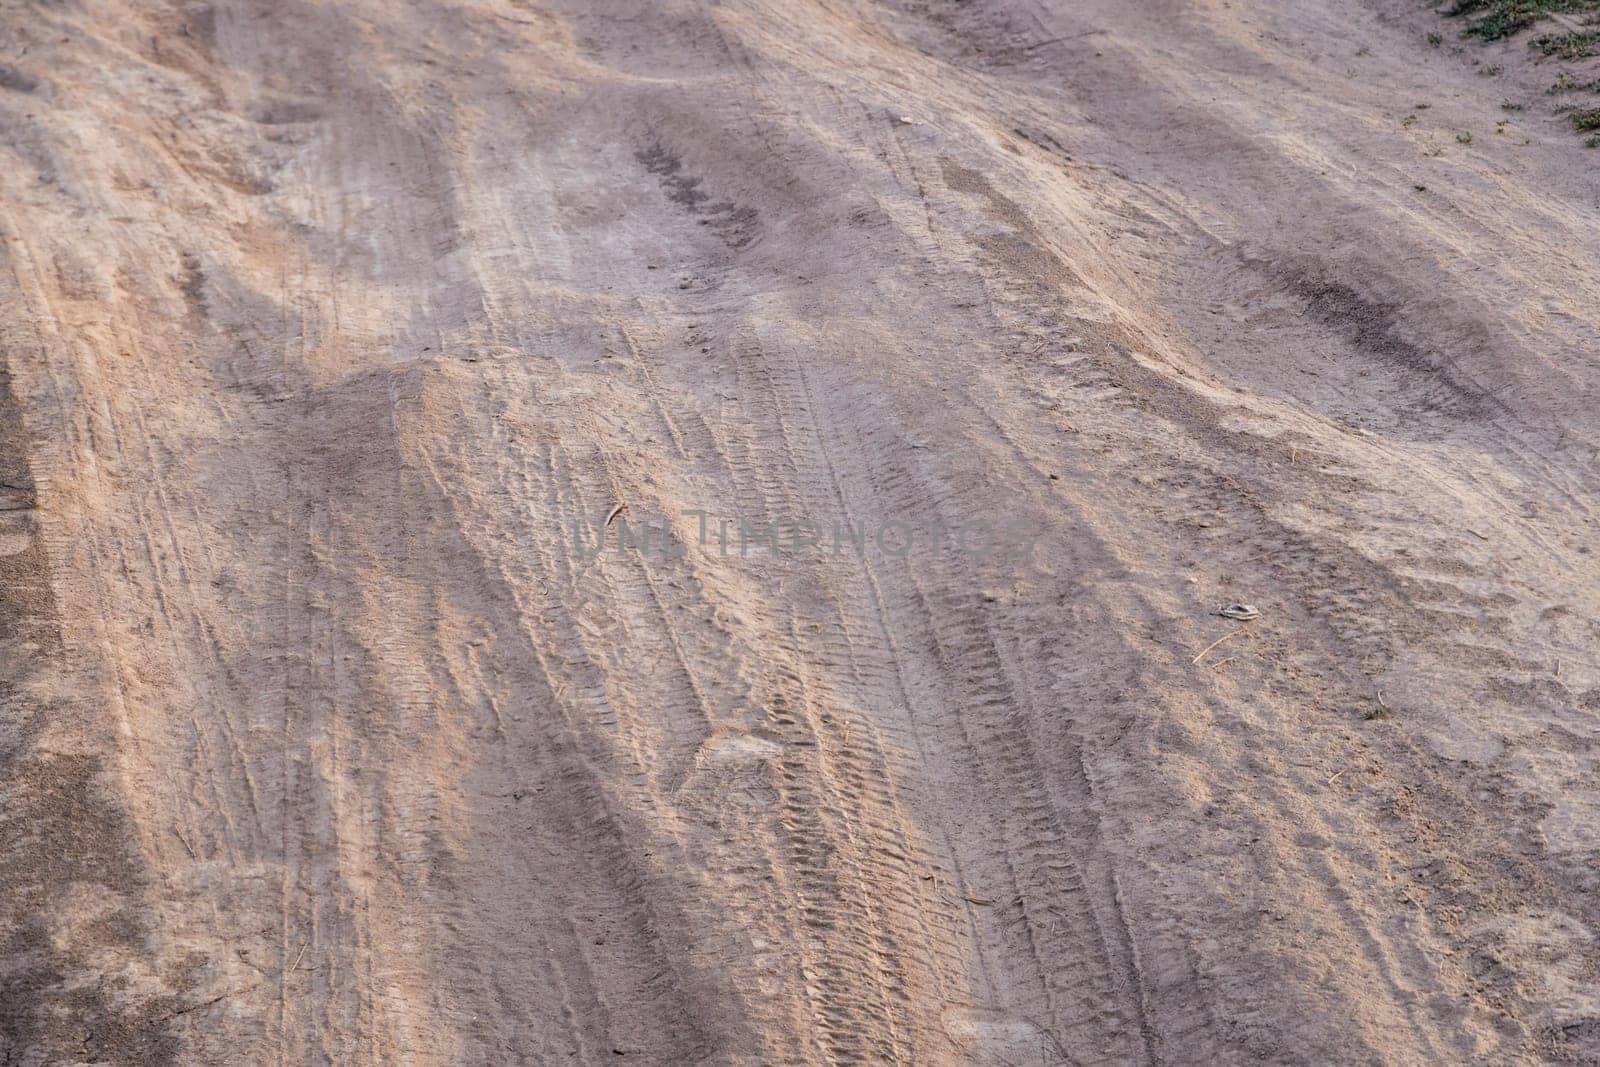 dusty dirt road at summer day, full-frame closeup view by z1b